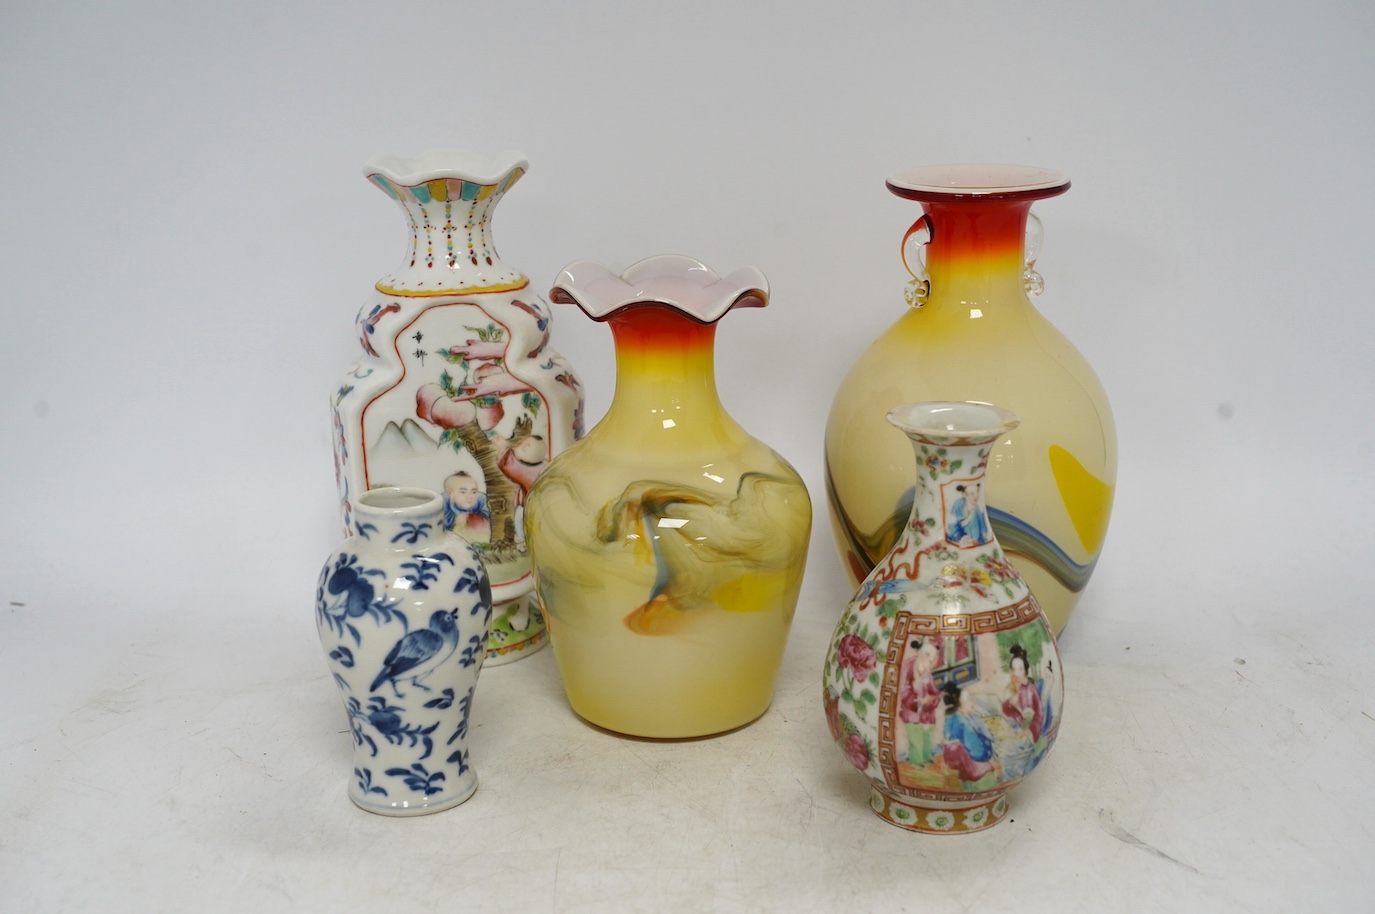 Two Dalian glass vases and three Chinese porcelain vases, 19th/20th century, tallest 19.5cm. Condition - fair